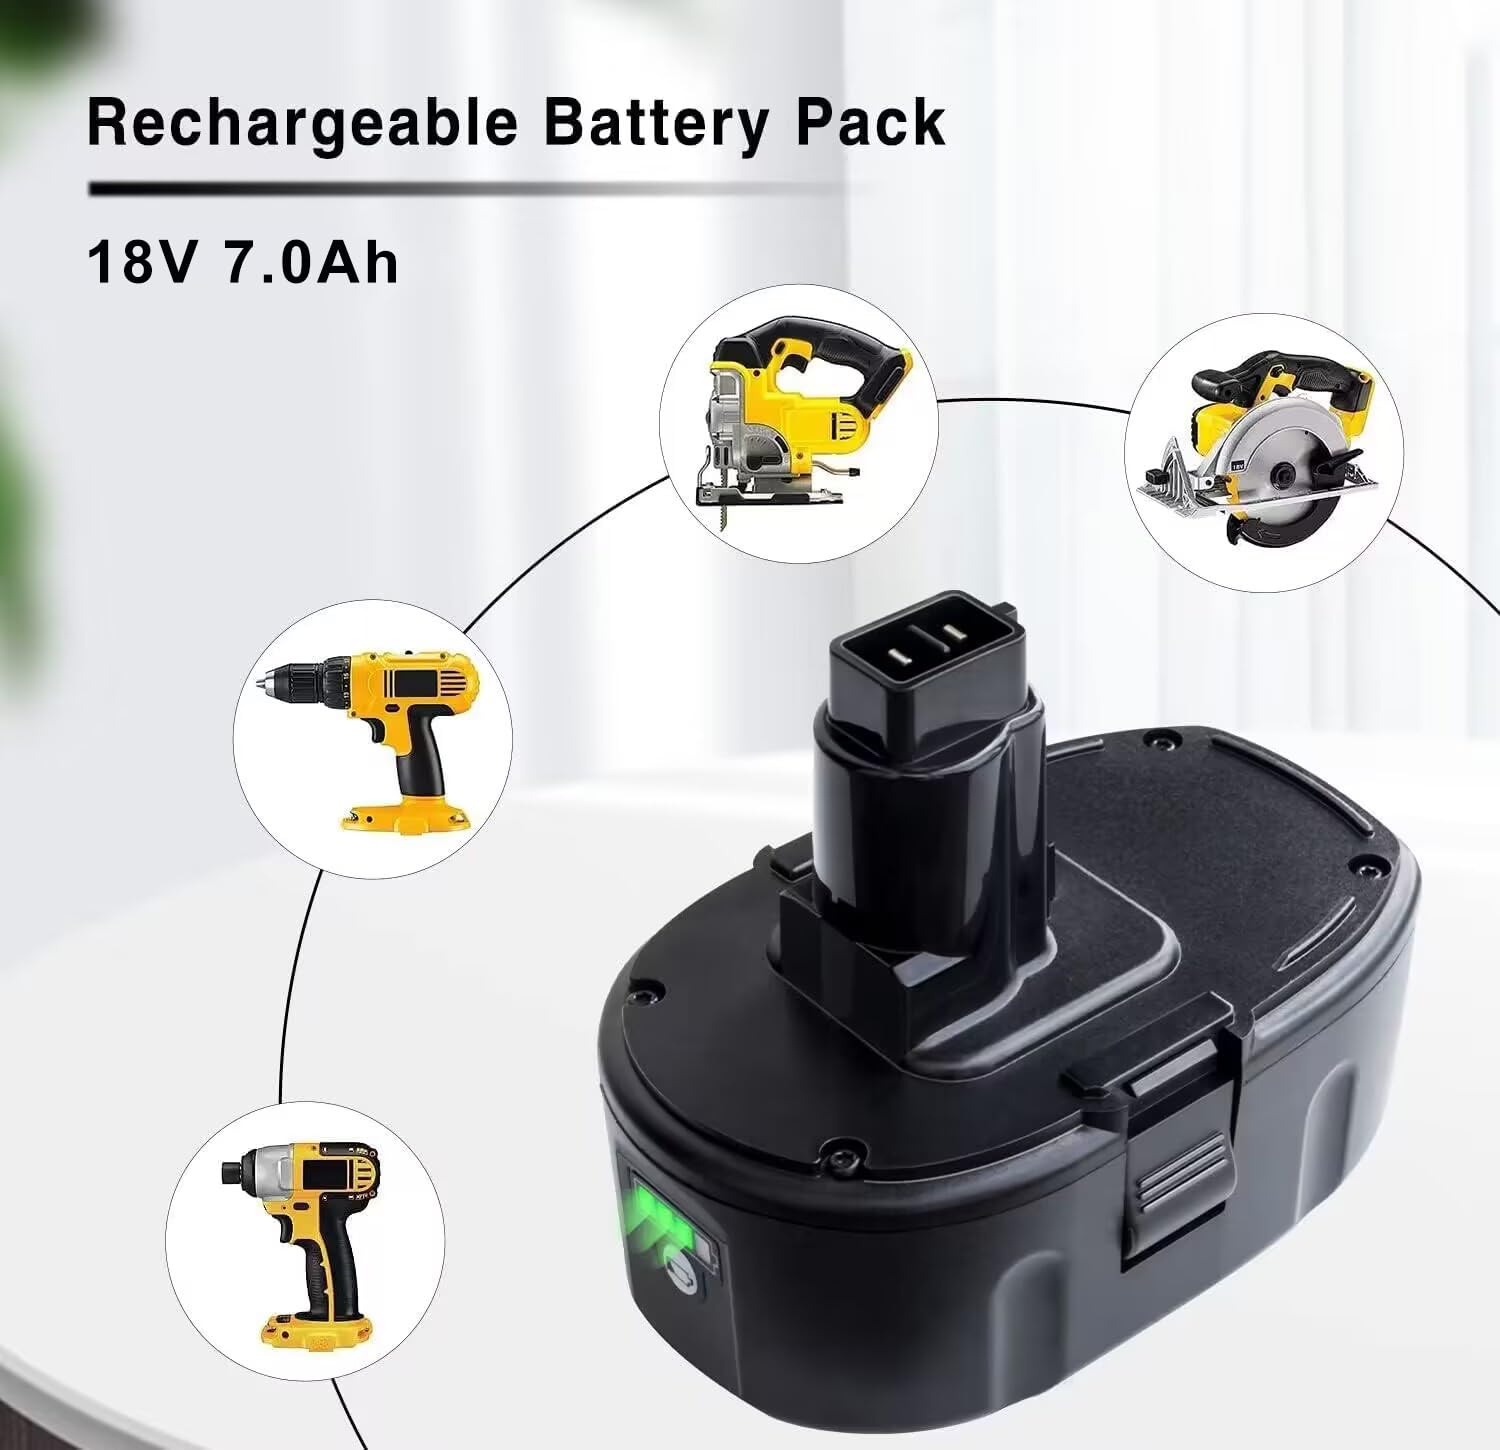 DTK 2Pack 7.0Ah Lithium-Ion Battery Replacement for Dewalt 18V XRP Ni-Cad DC9096 DC9098 DC9099 DE9039 DE9095 DE9096 DE9098 DW9095 DW9096 DW9098 DE9503 DC9182 18V XRP Batteries